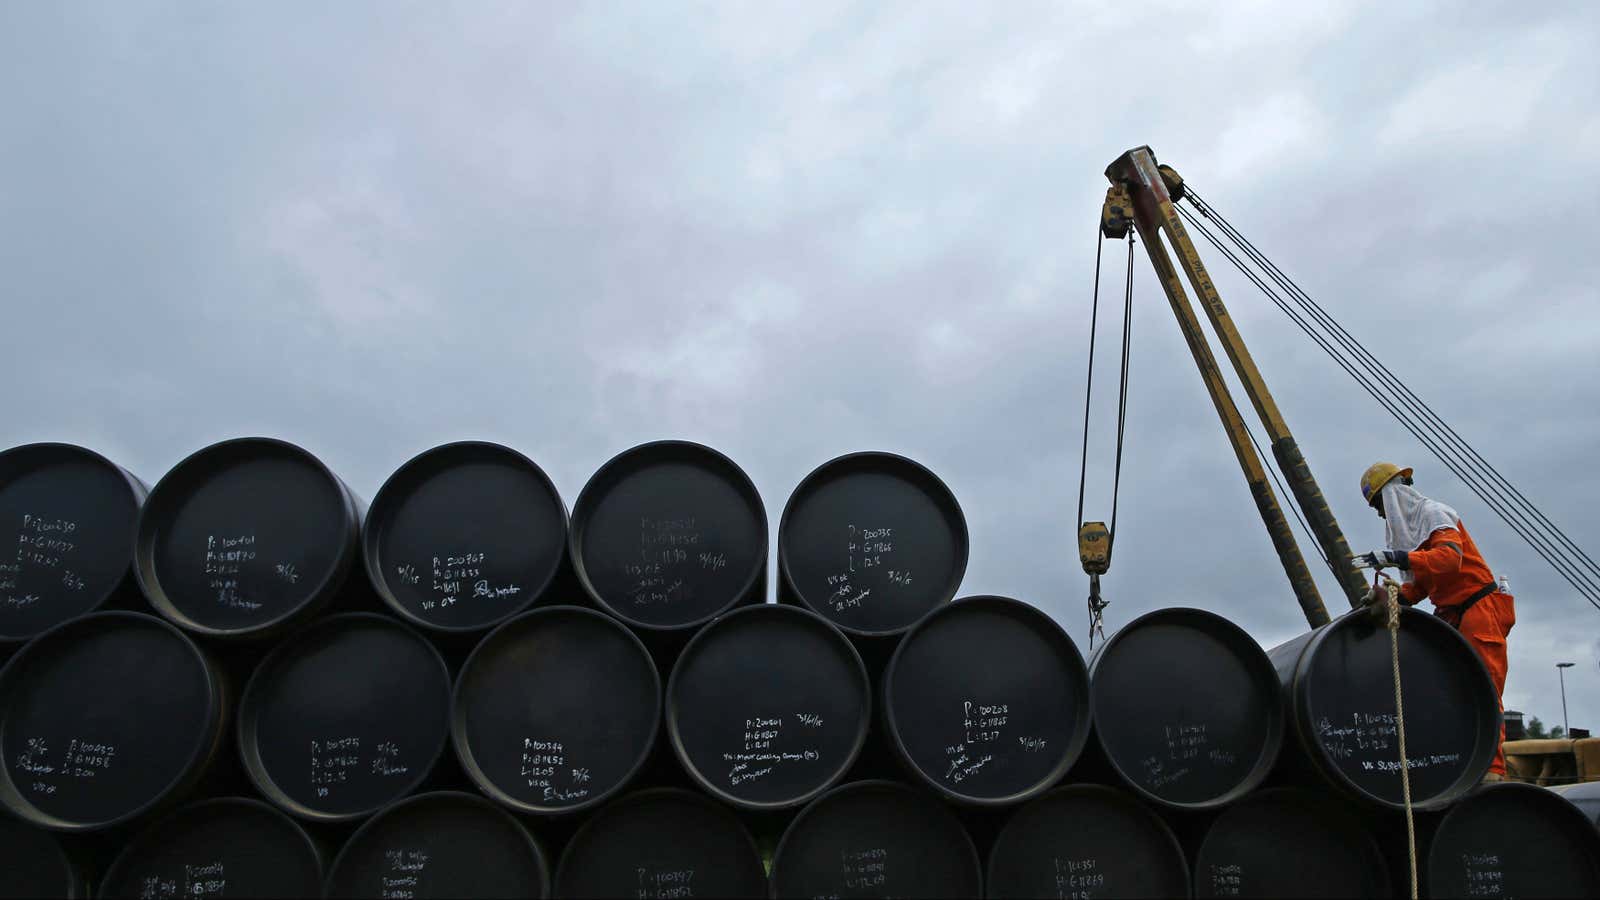 The plunge in oil prices has hit oil exporters hard.